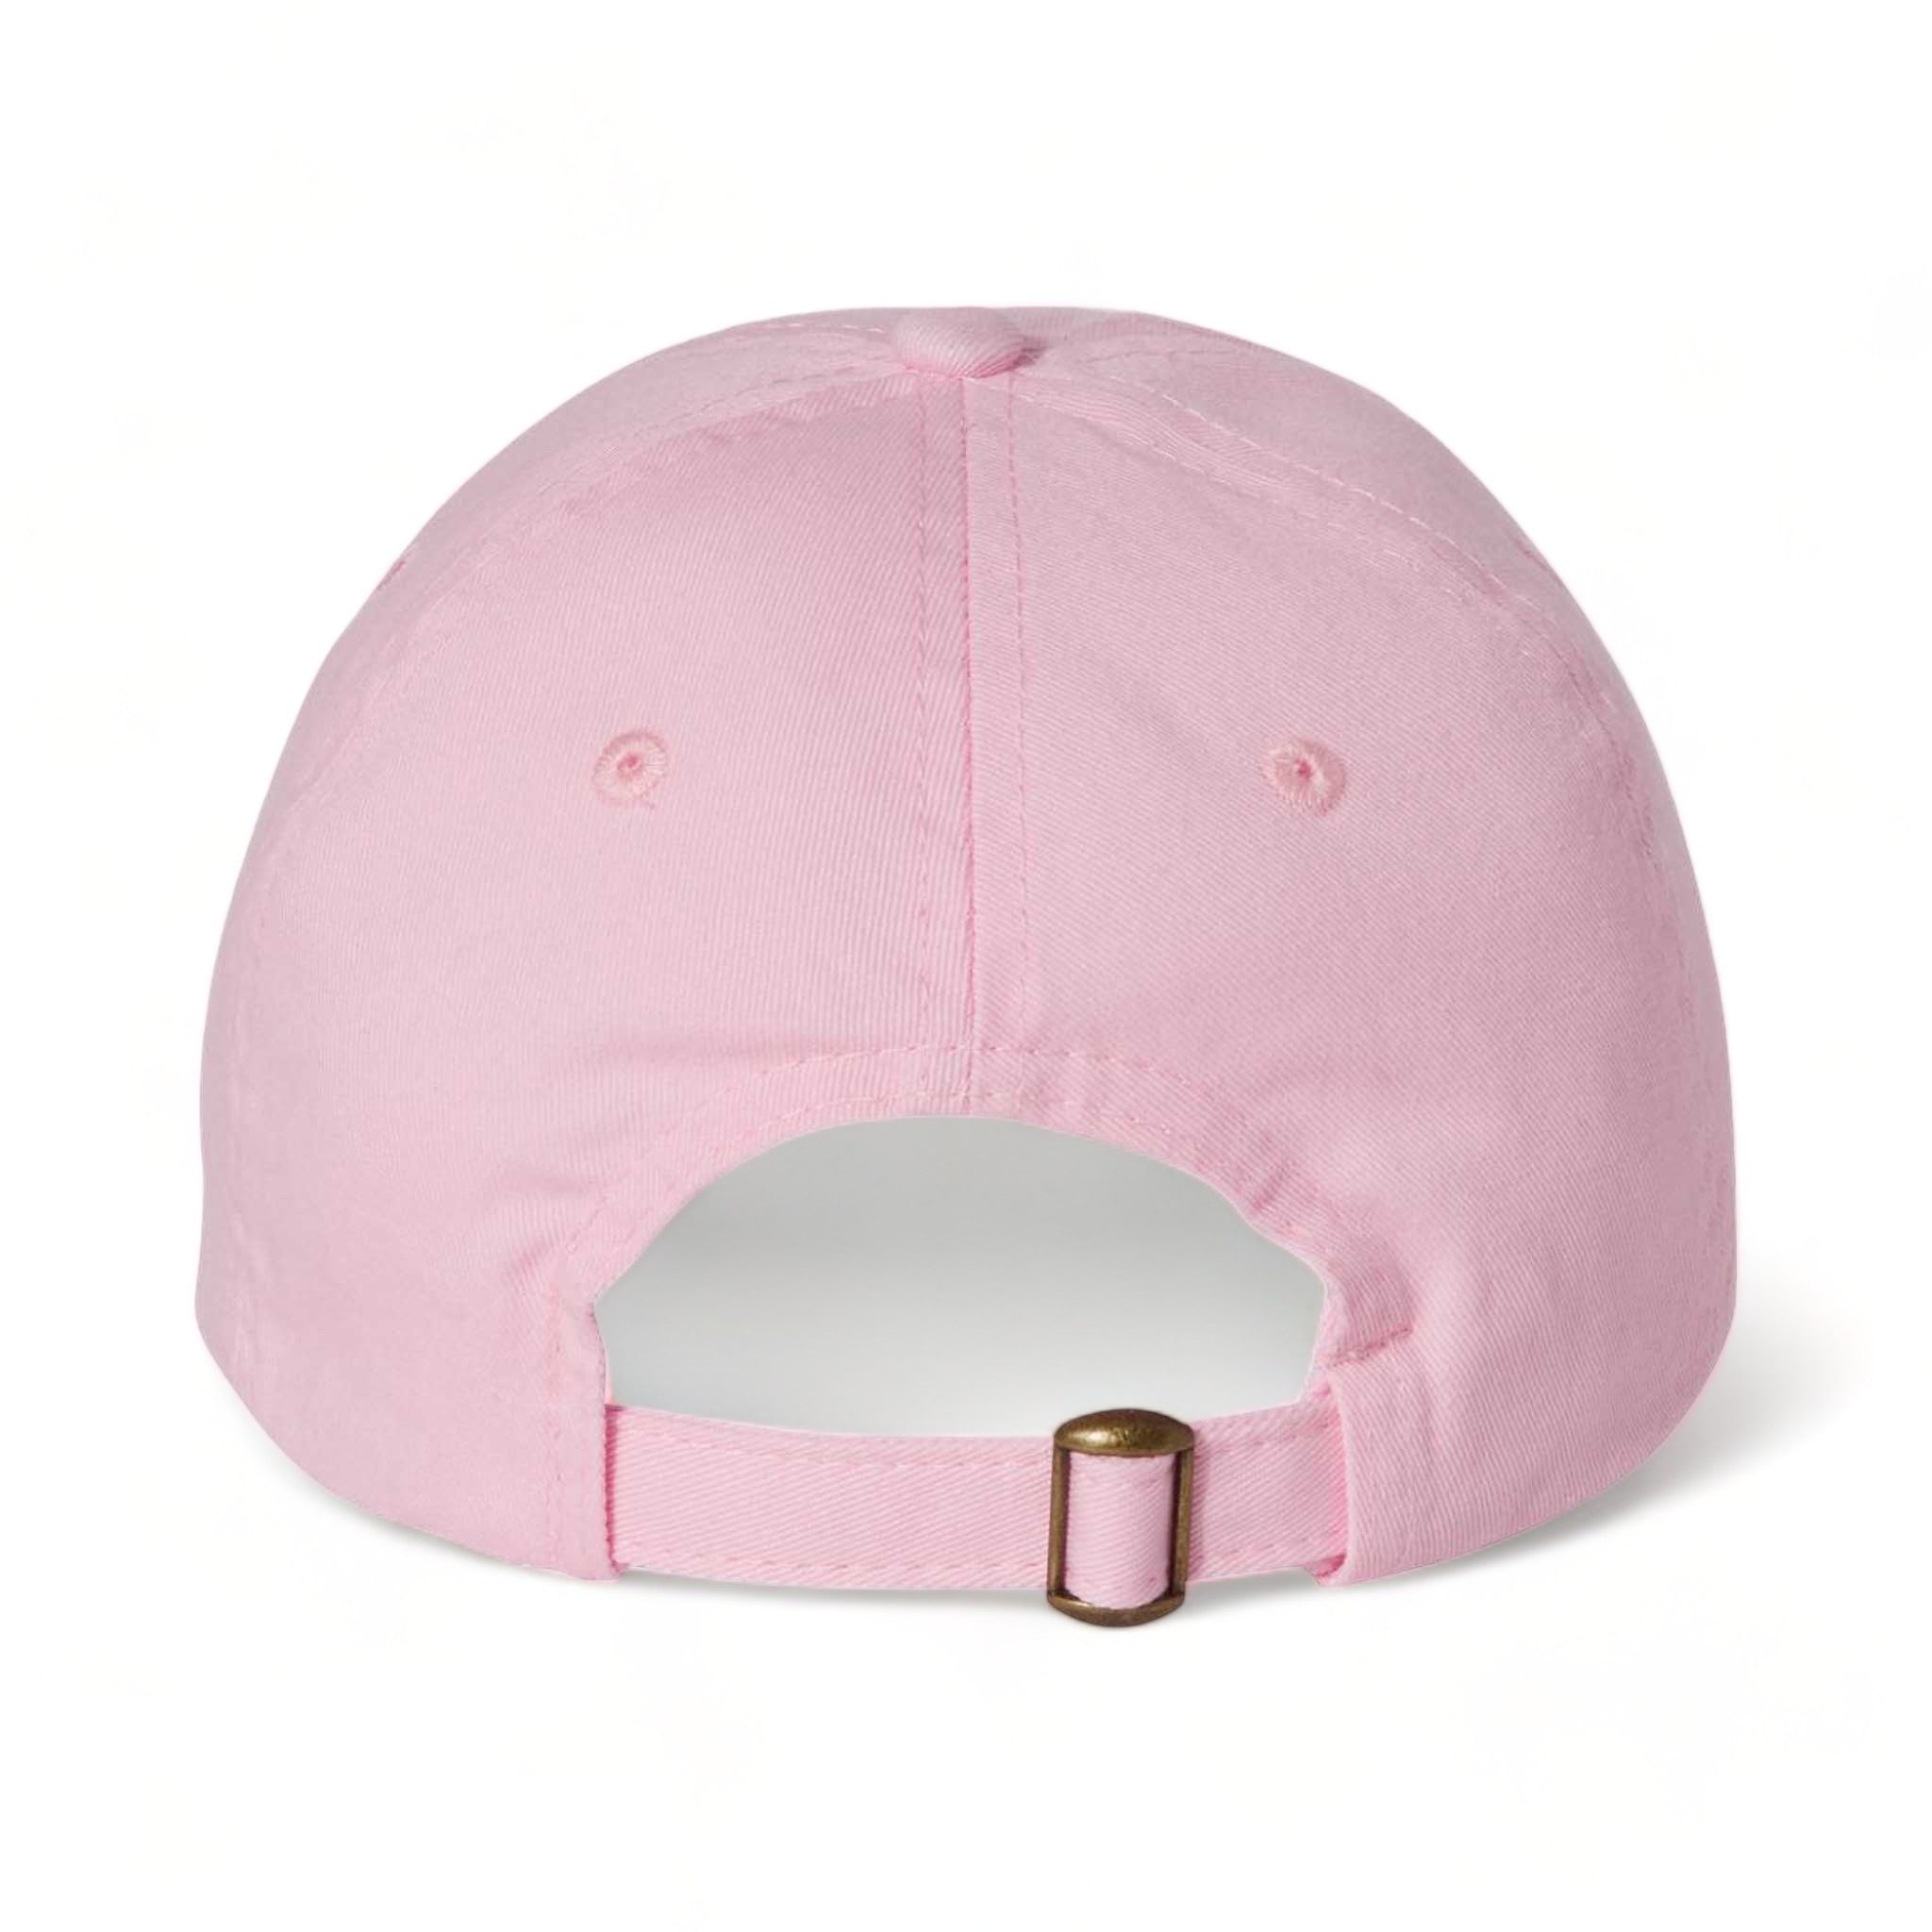 Back view of Valucap VC300A custom hat in light pink